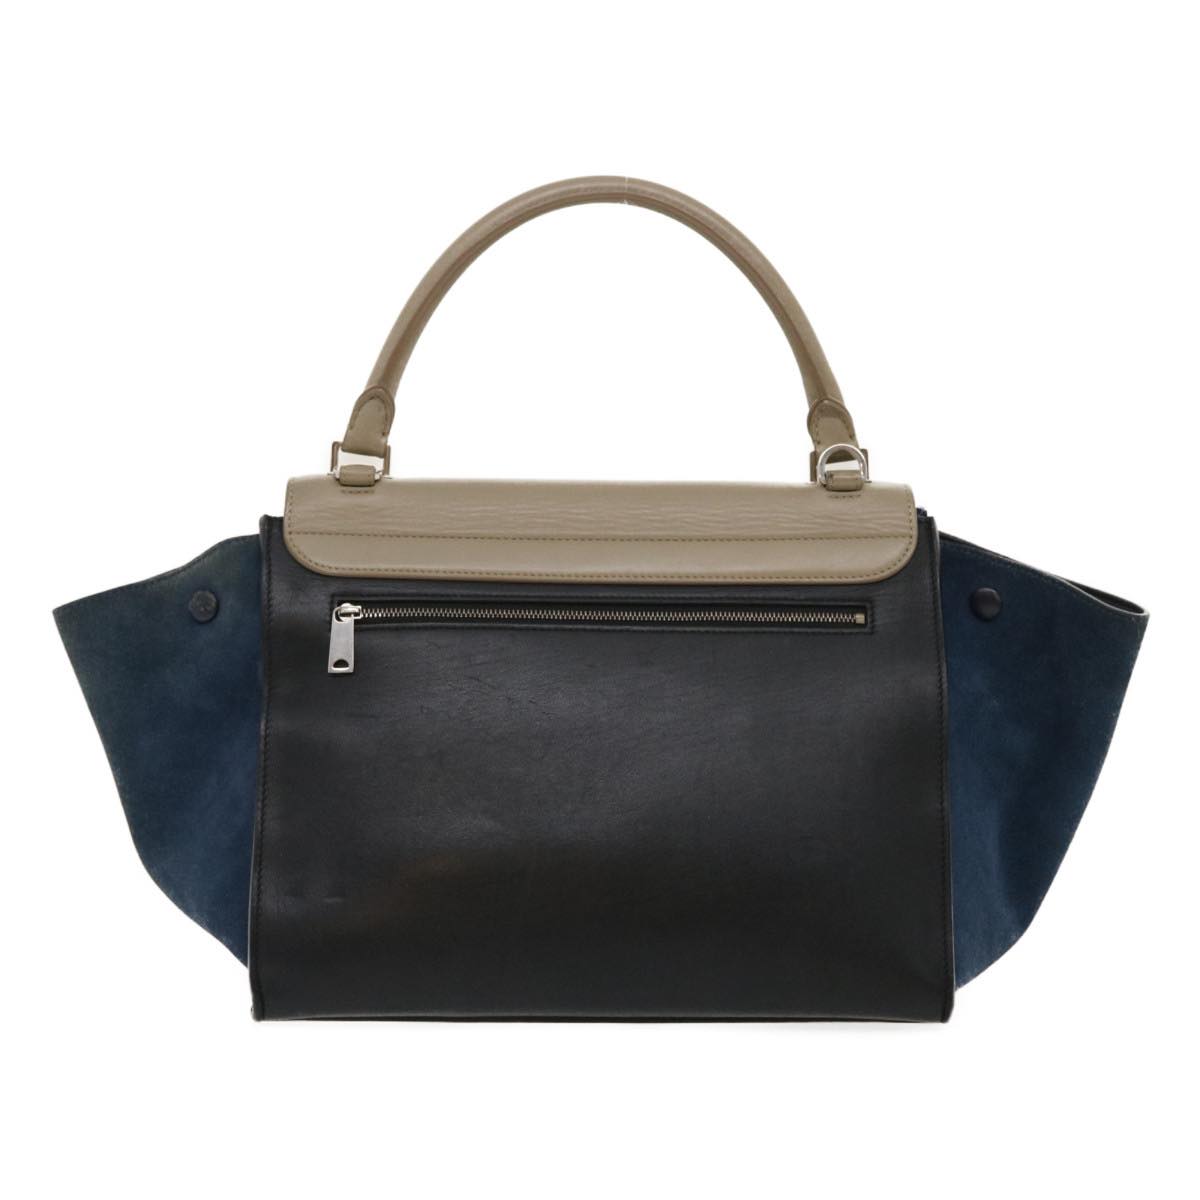 CELINE Hand Bag Leather Suede Gray Navy Auth am2375g - 0